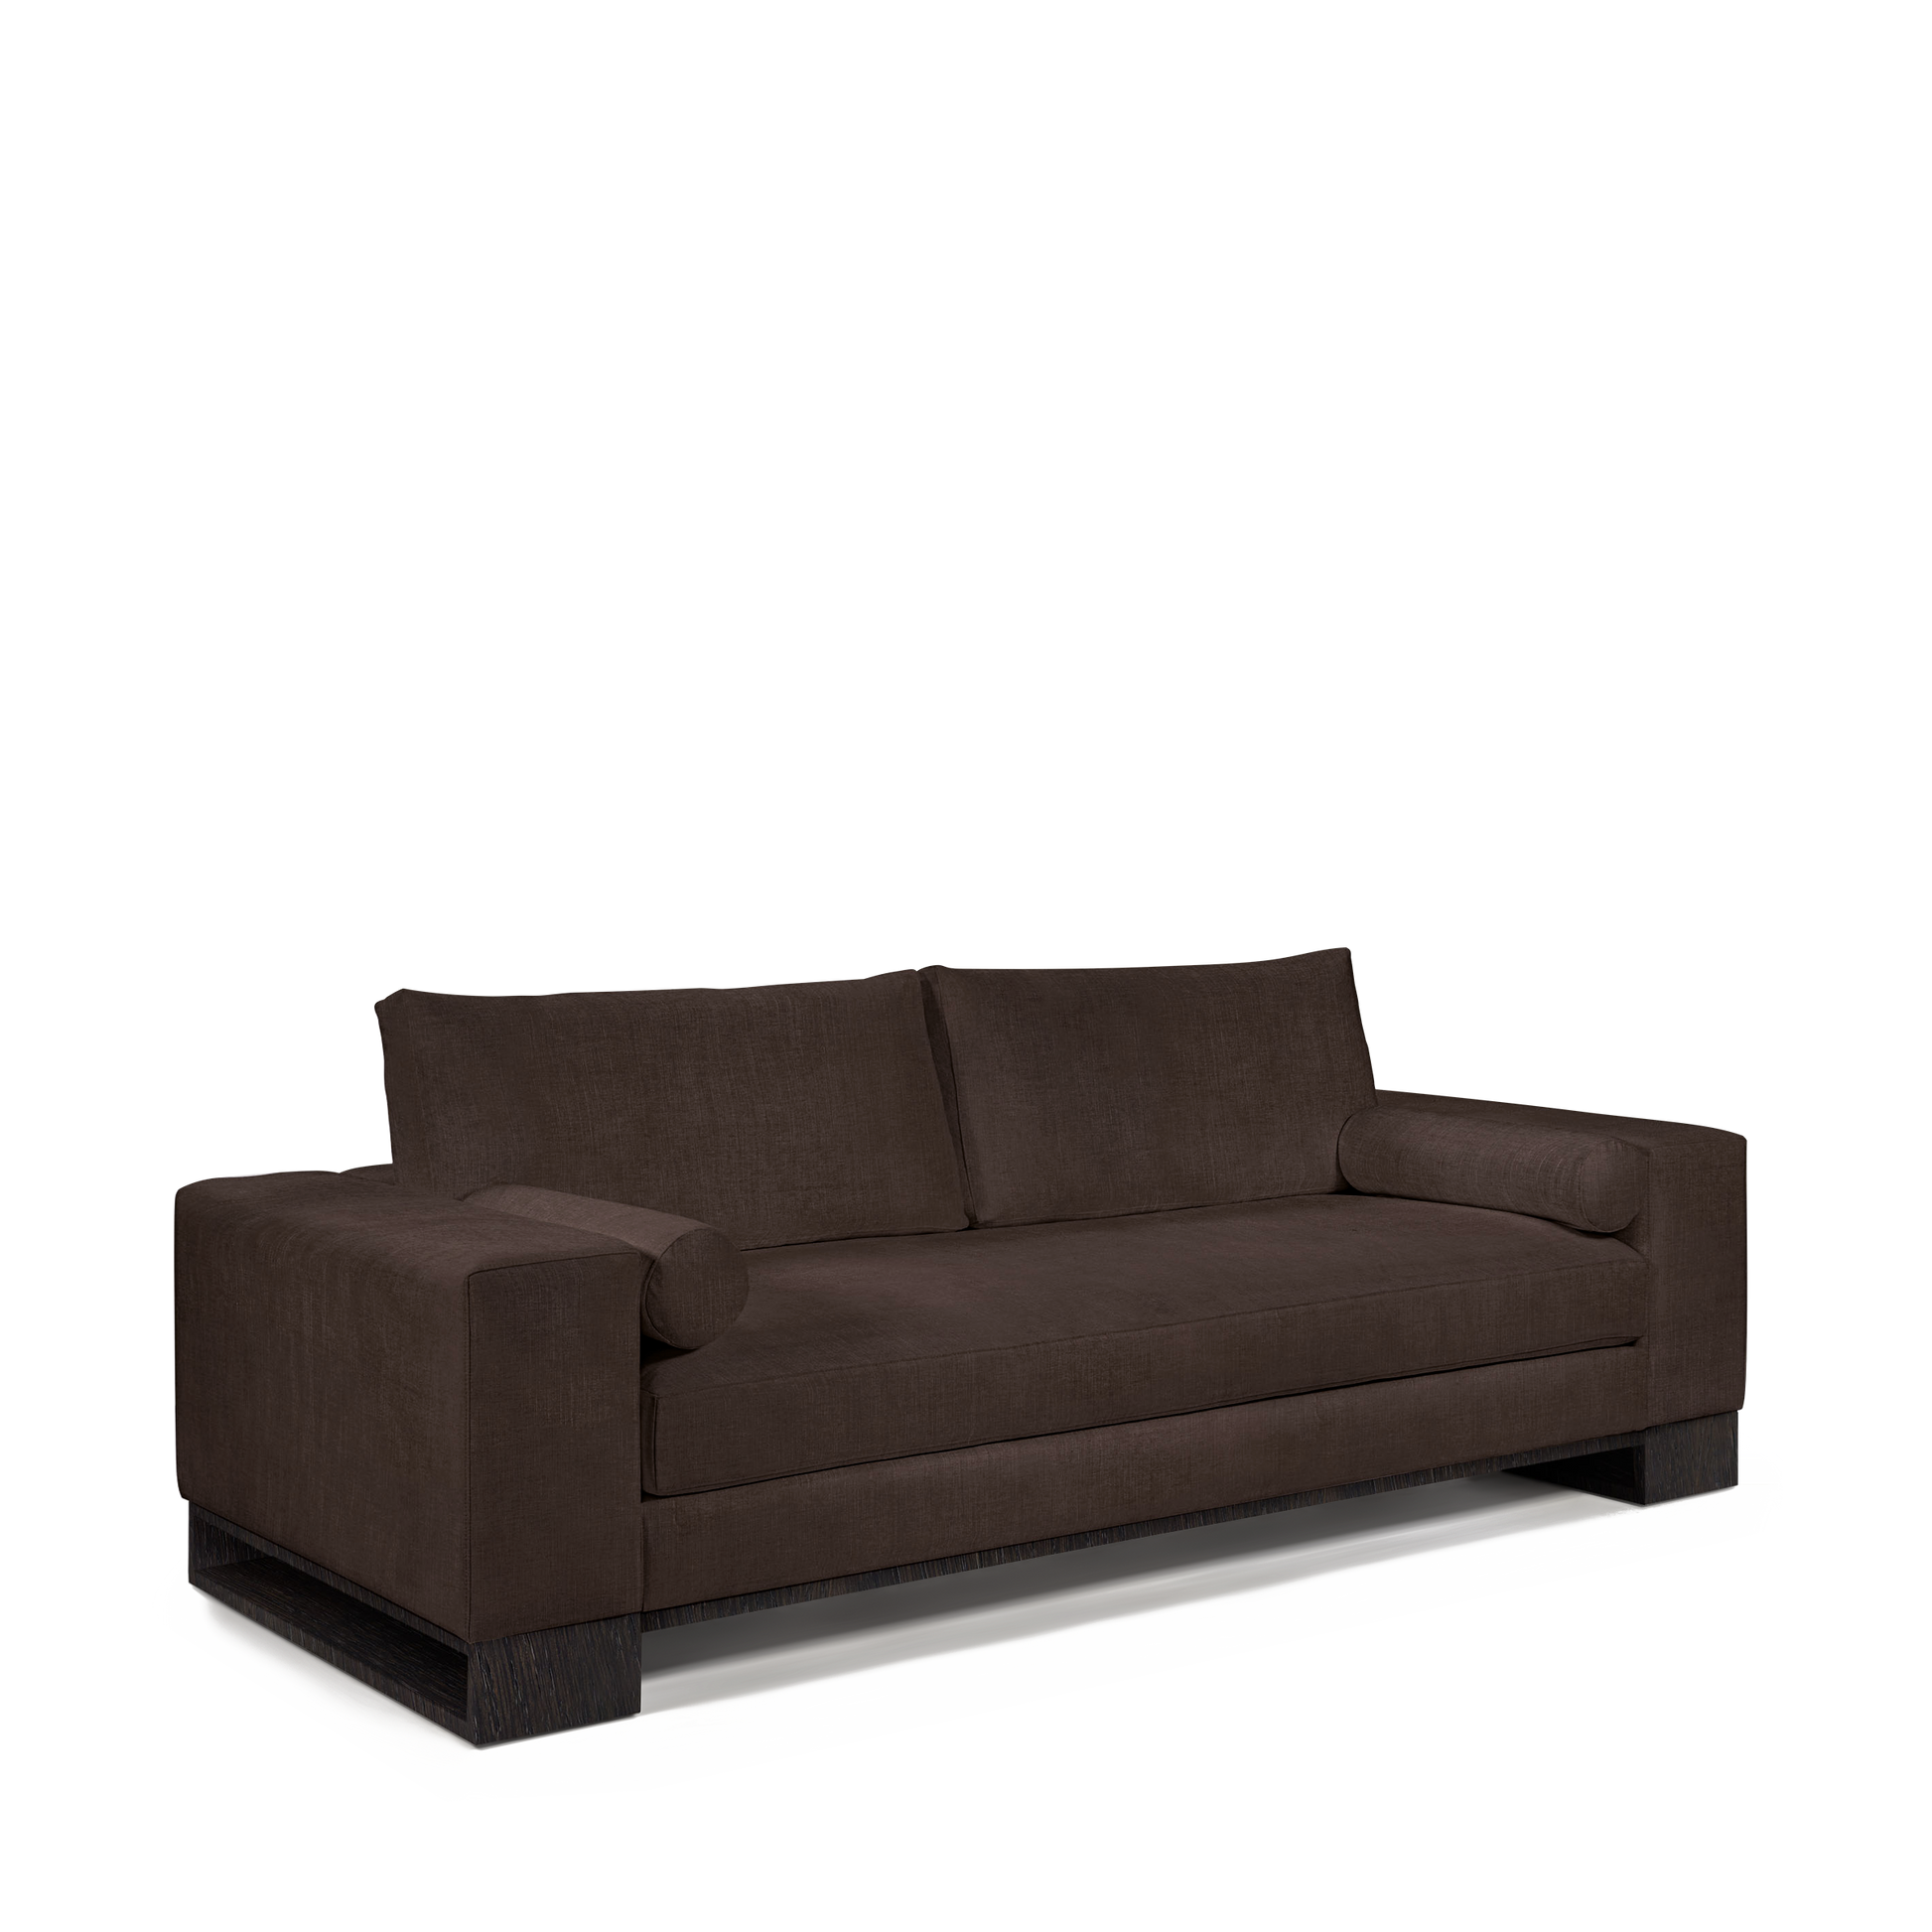 TERRA 2,5-seater sofa with linara brown textile and chocolate wood legs 